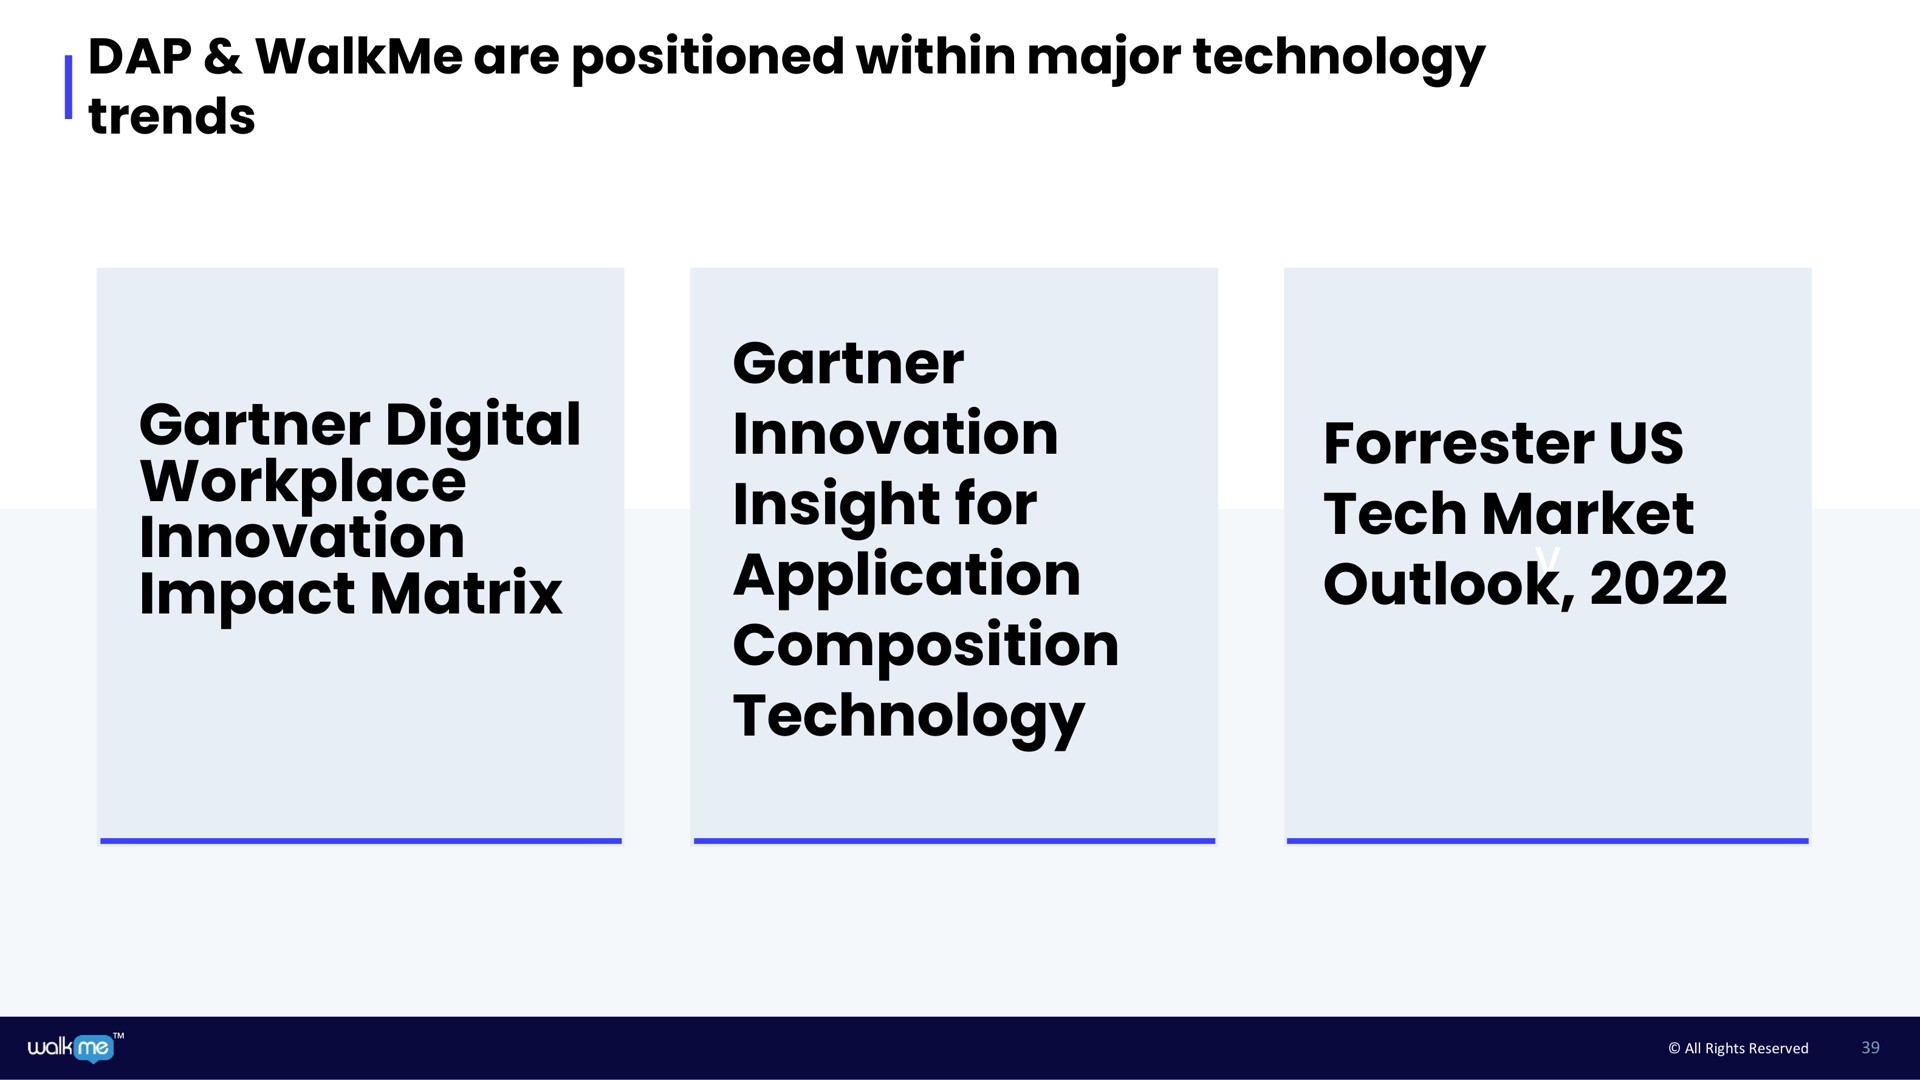 dap are positioned within major technology trends digital workplace innovation impact matrix innovation insight for application composition technology us tech market outlook | Walkme